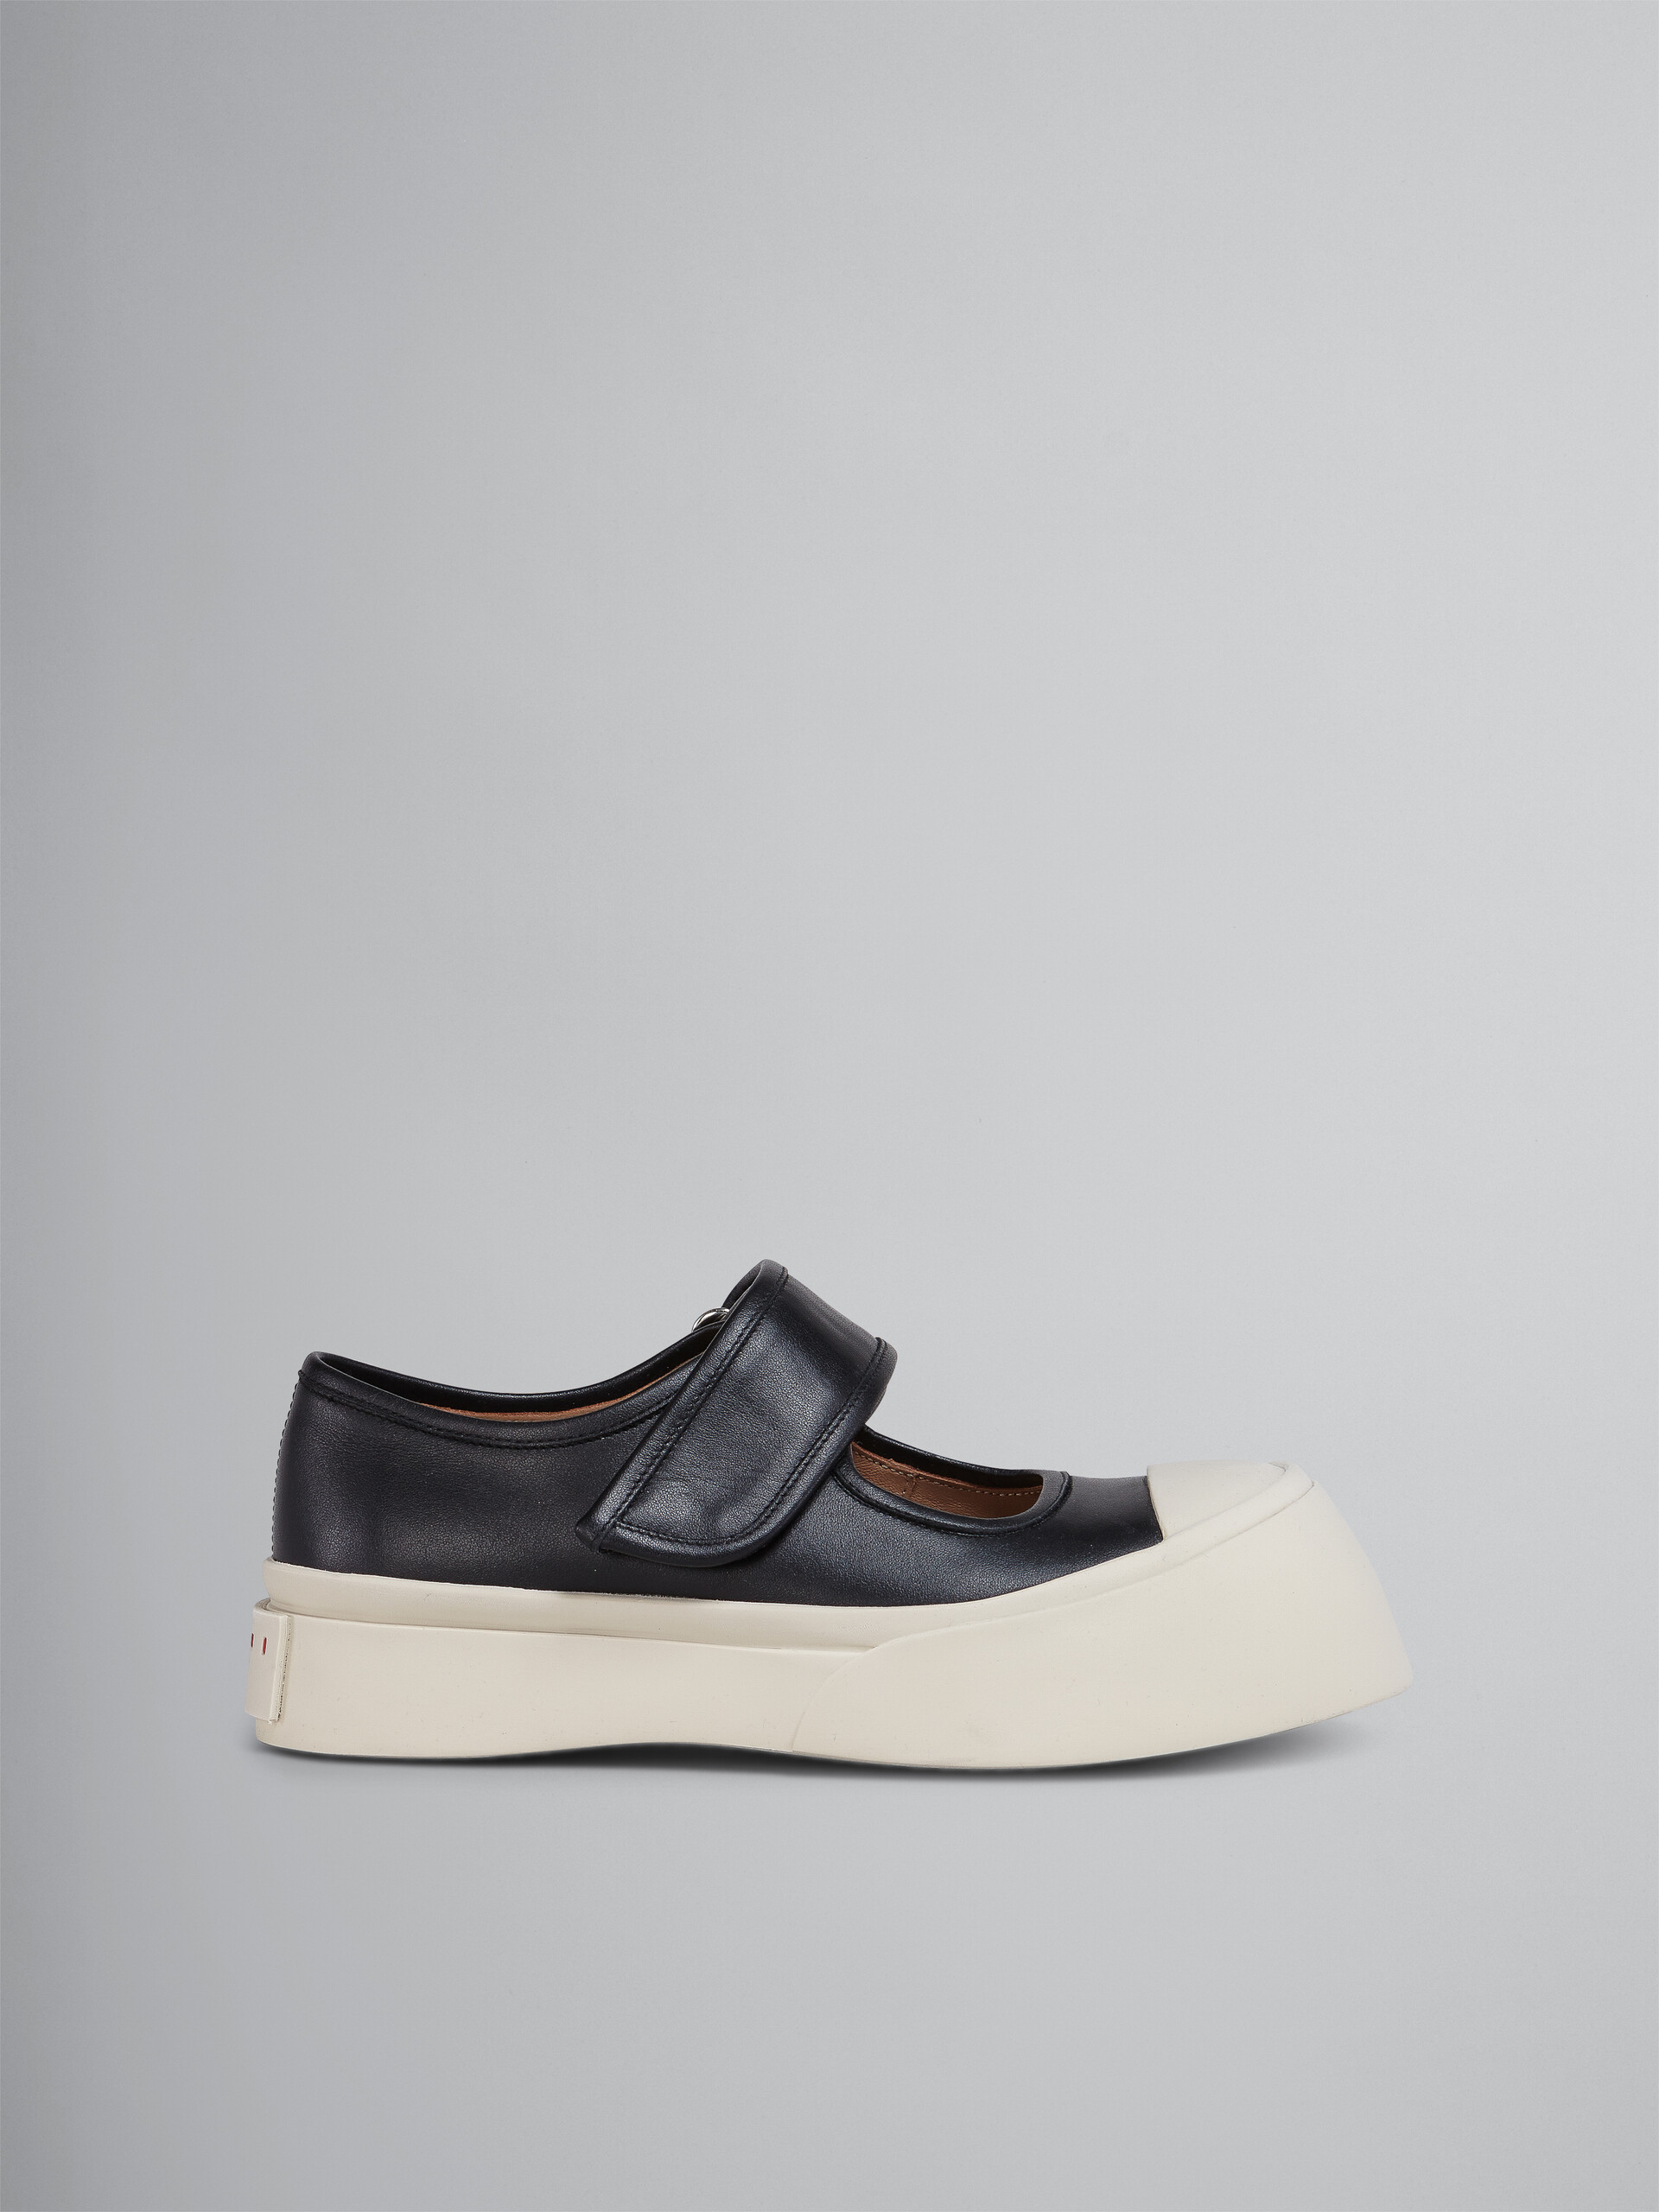 Black nappa leather Mary Jane sneaker - Sneakers - Image 1